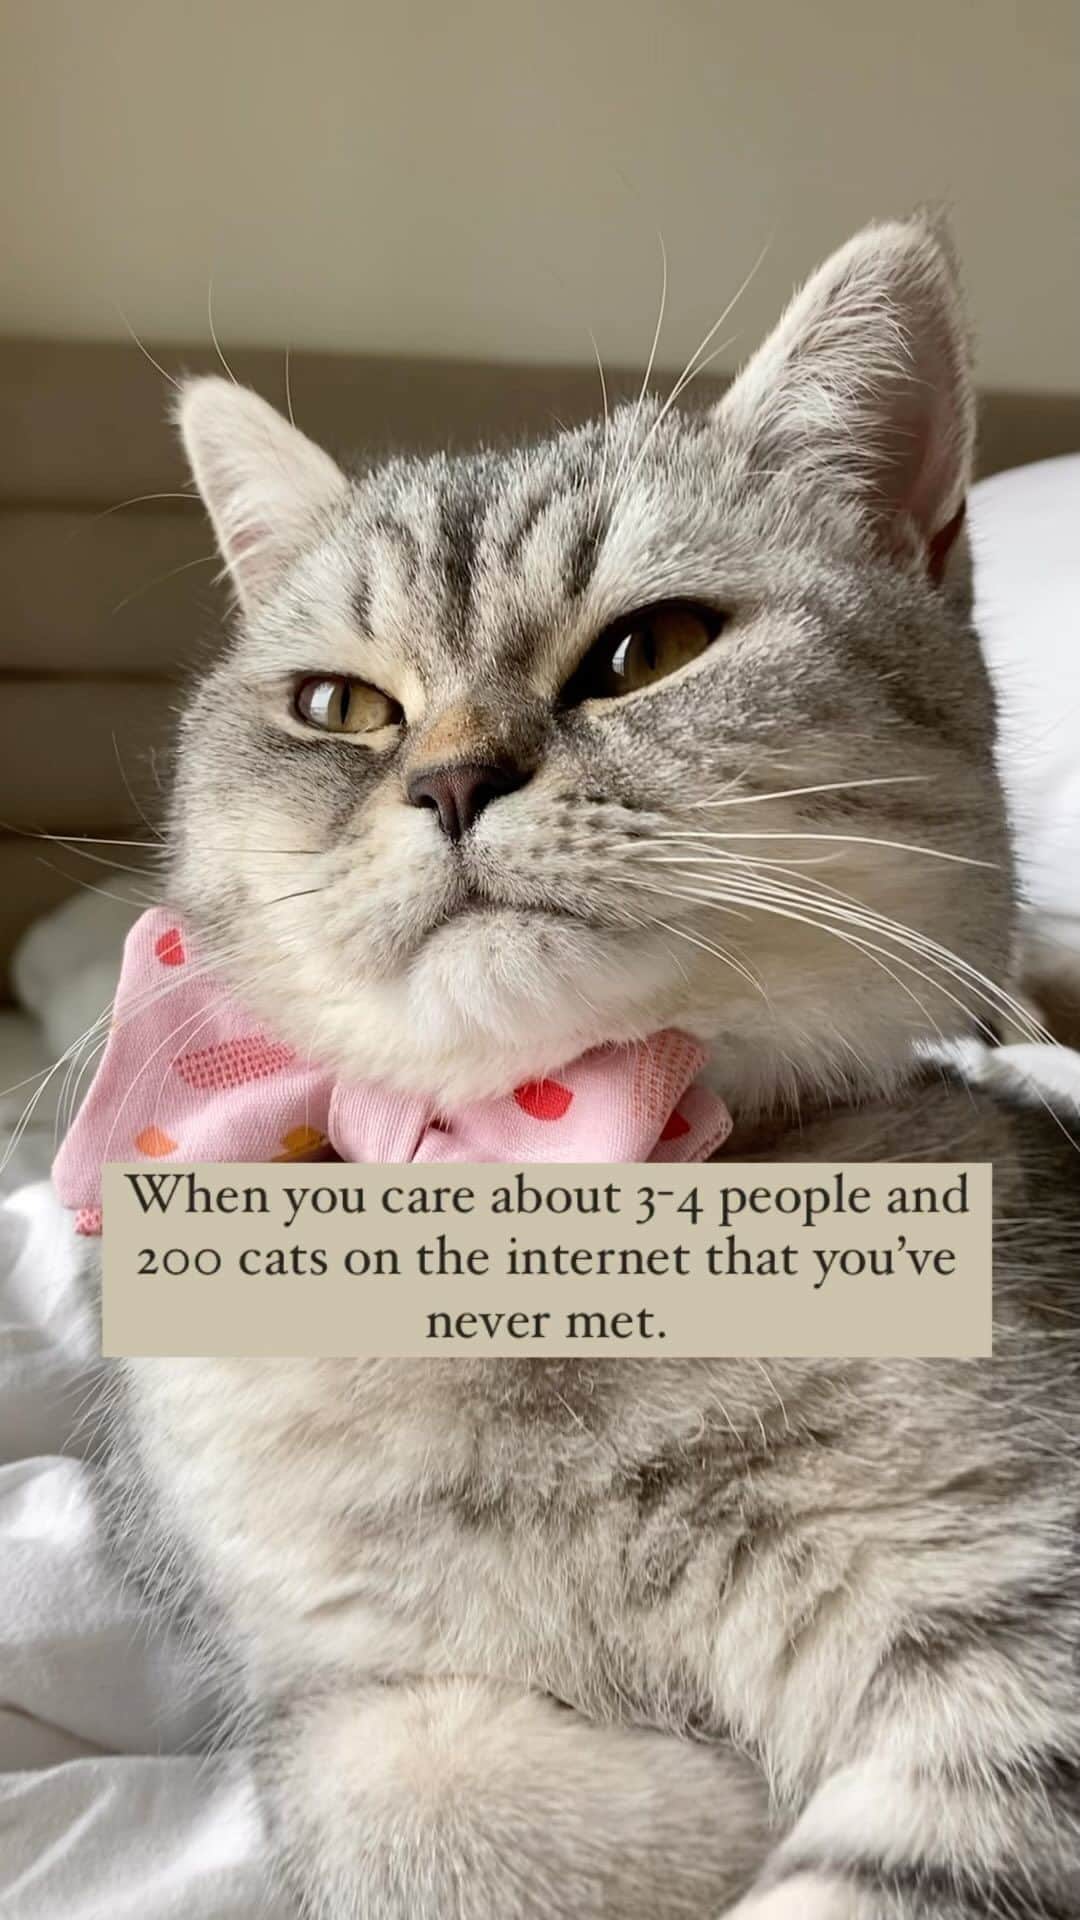 catinberlinのインスタグラム：「Facts. 💁🏼‍♀️😻 Tag someone who’s gulity! 🤓💁🏼‍♀️🙋🏼‍♀️  catinberlin.com  #catsofinstagram #cats #cat #katze #kitty #pets #petsofinstagram #animals #catinberlin #reel #reels #reelsinstagram #funnymemes #funny #funnycats #cute #adorable #weeklyfluff」